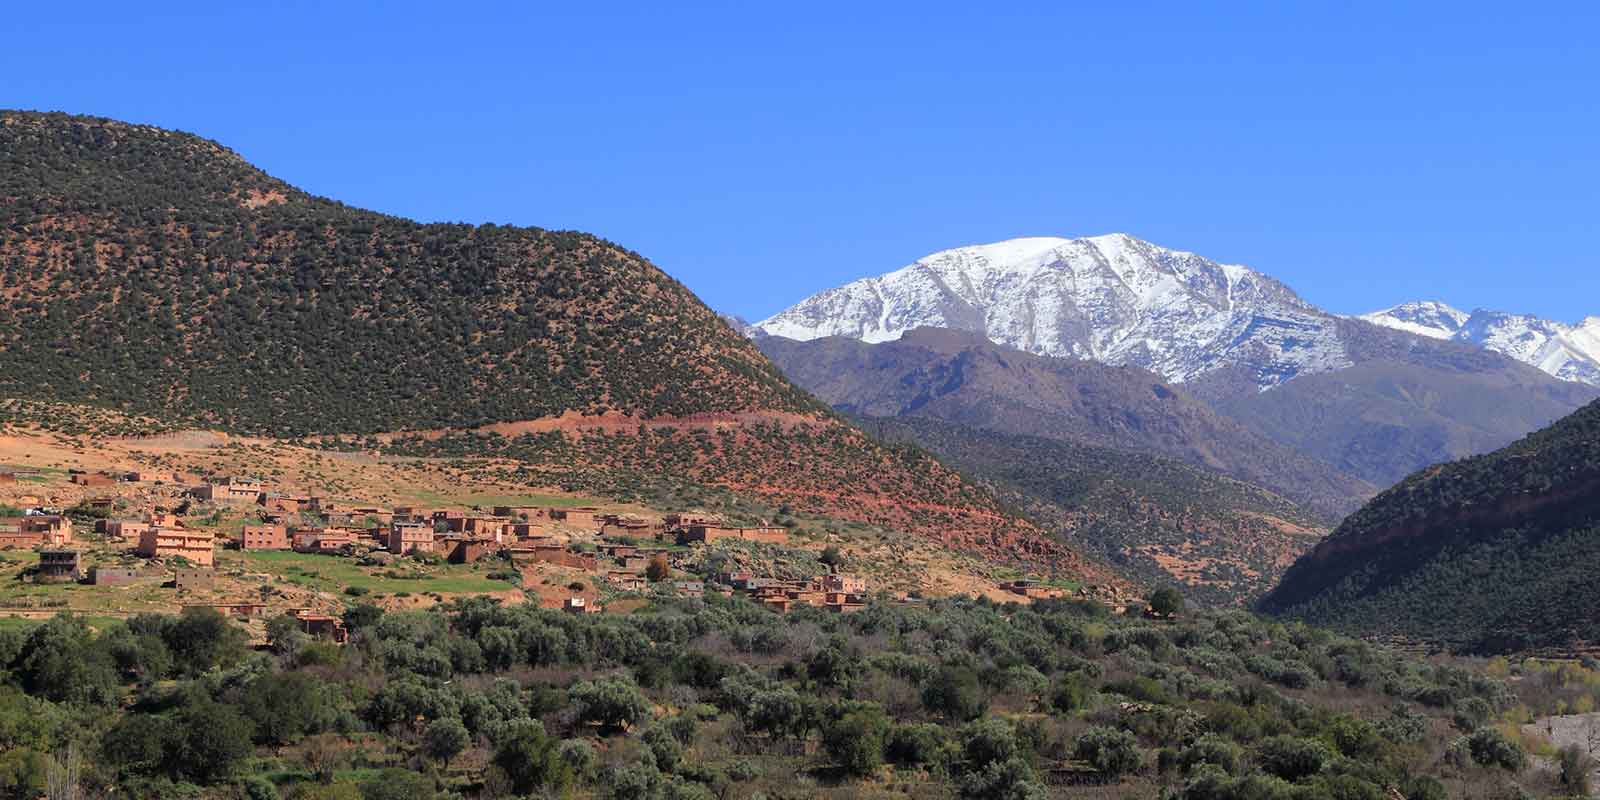 Snow-covered peaks of Toubkal National Park in High Atlas Mountains